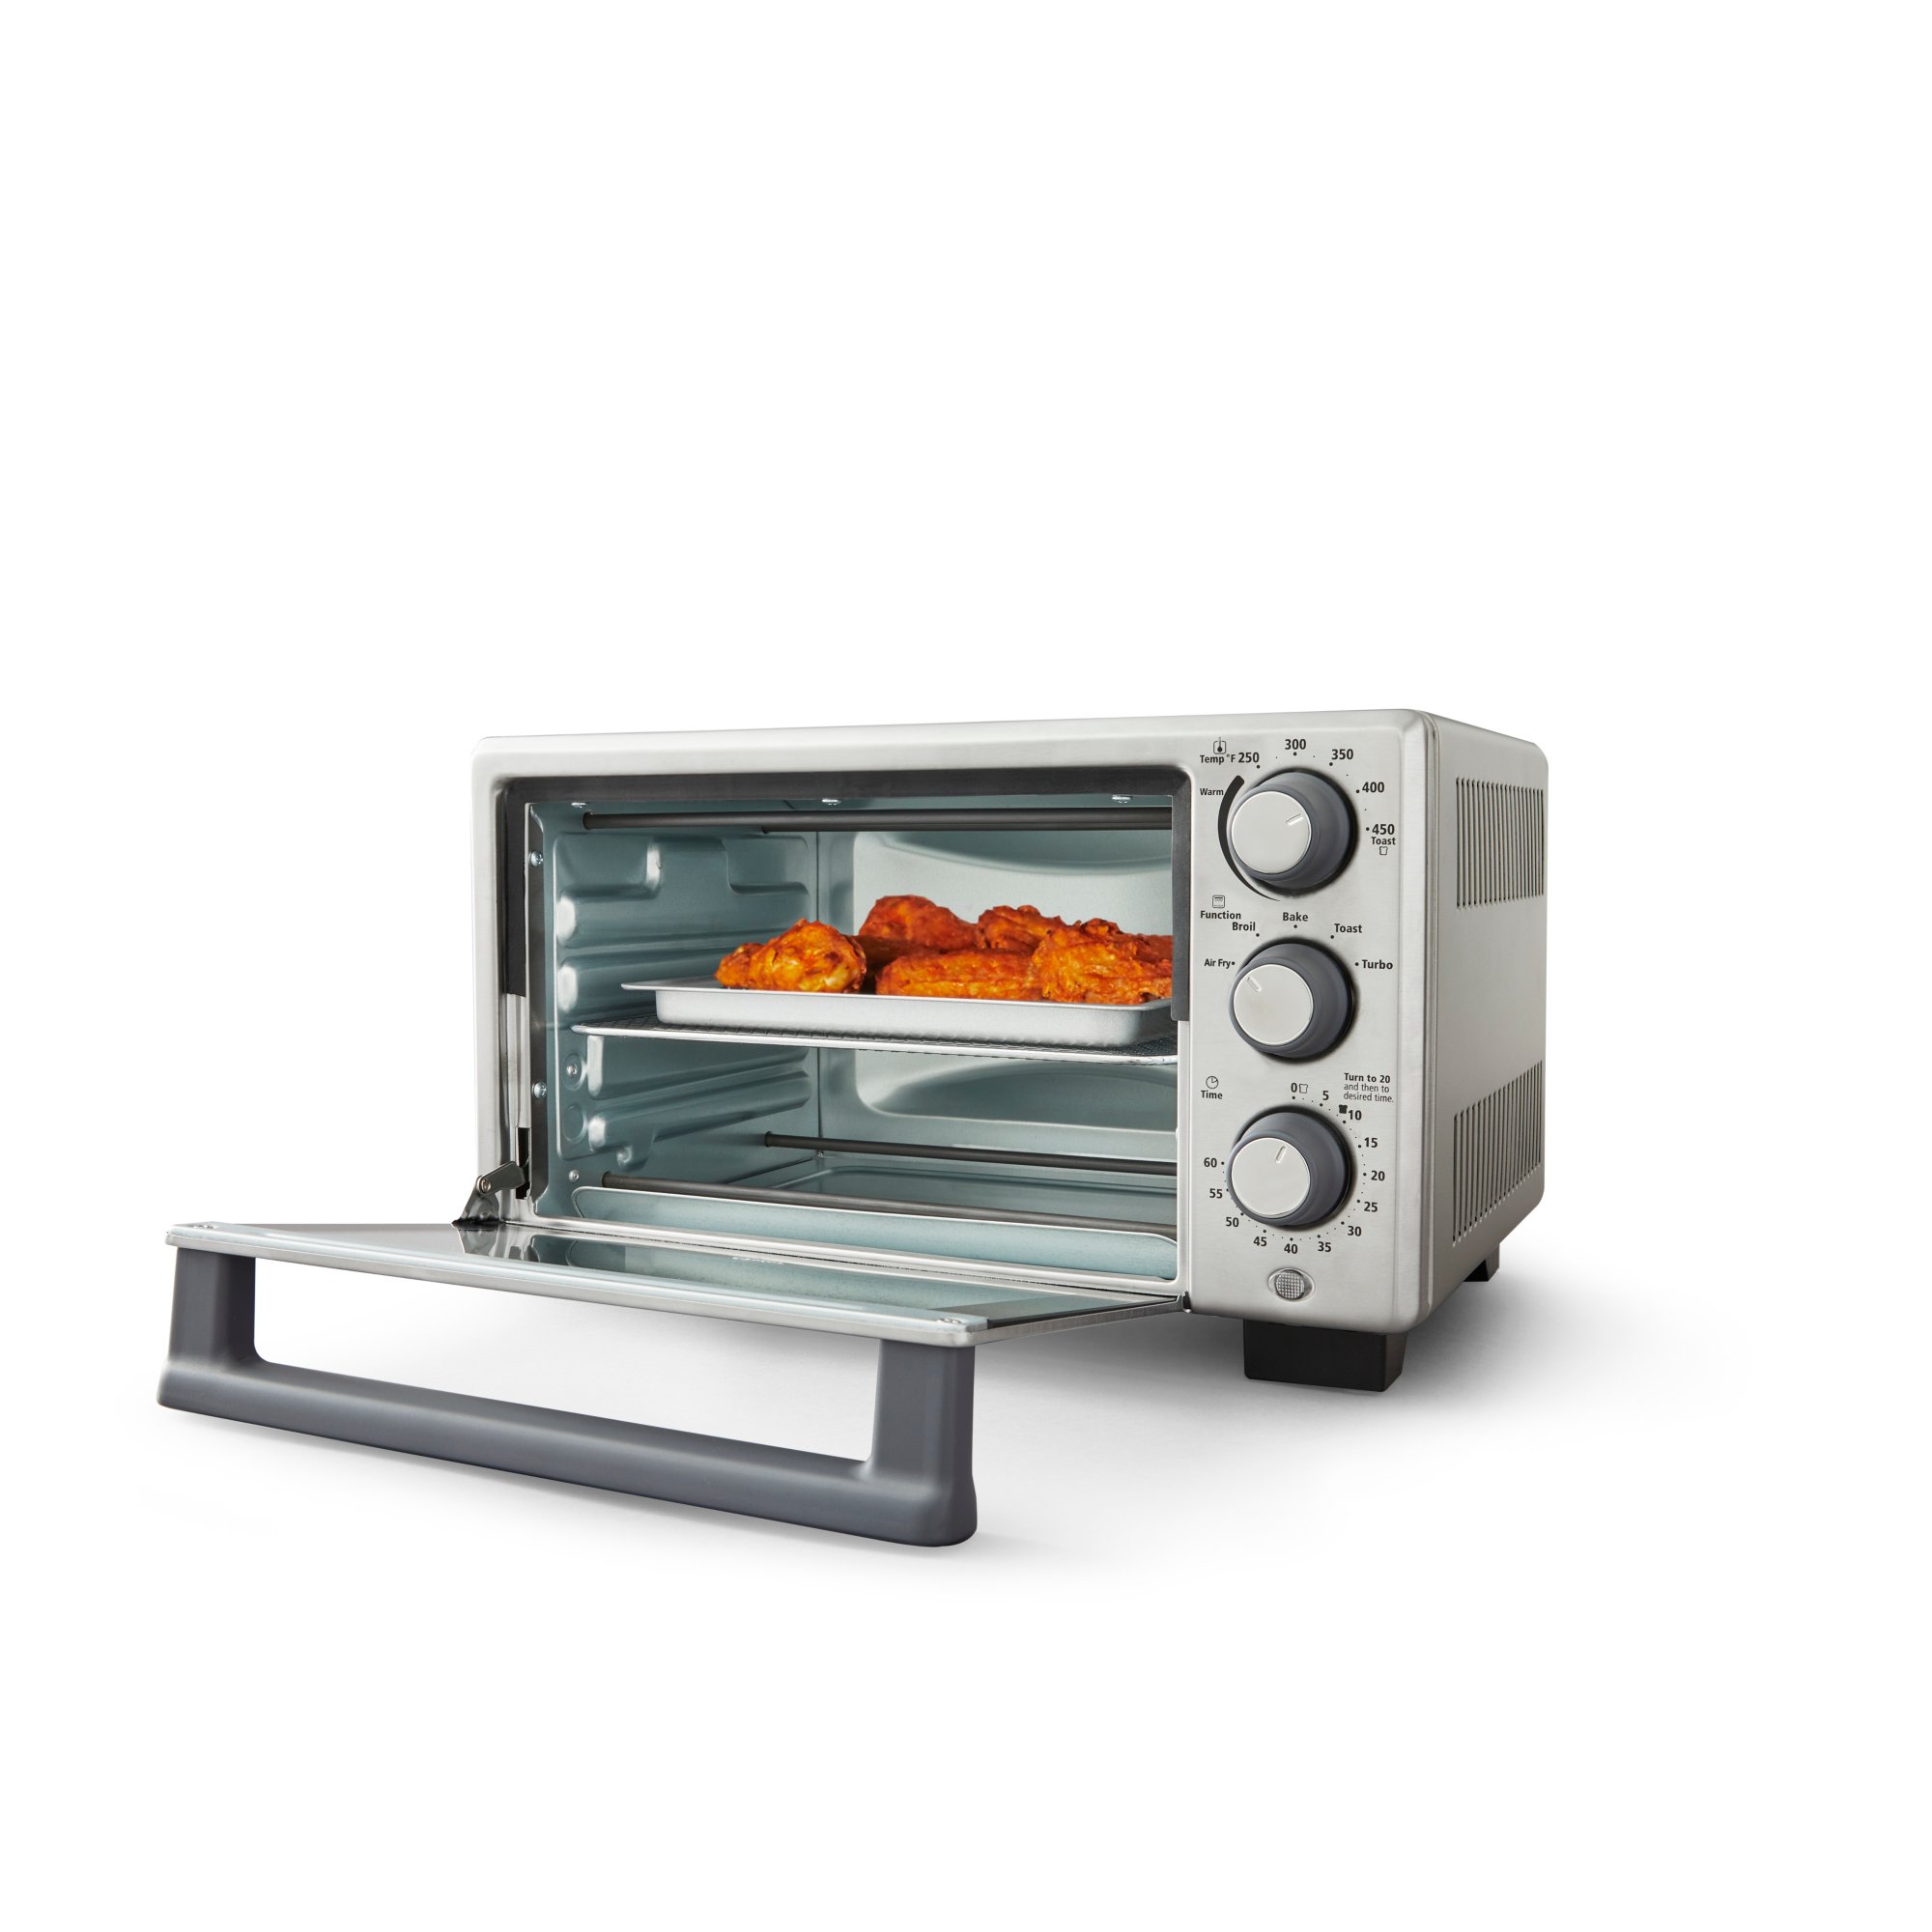 Oster 6-Slice Convection Toaster Oven in the Toaster Ovens department at